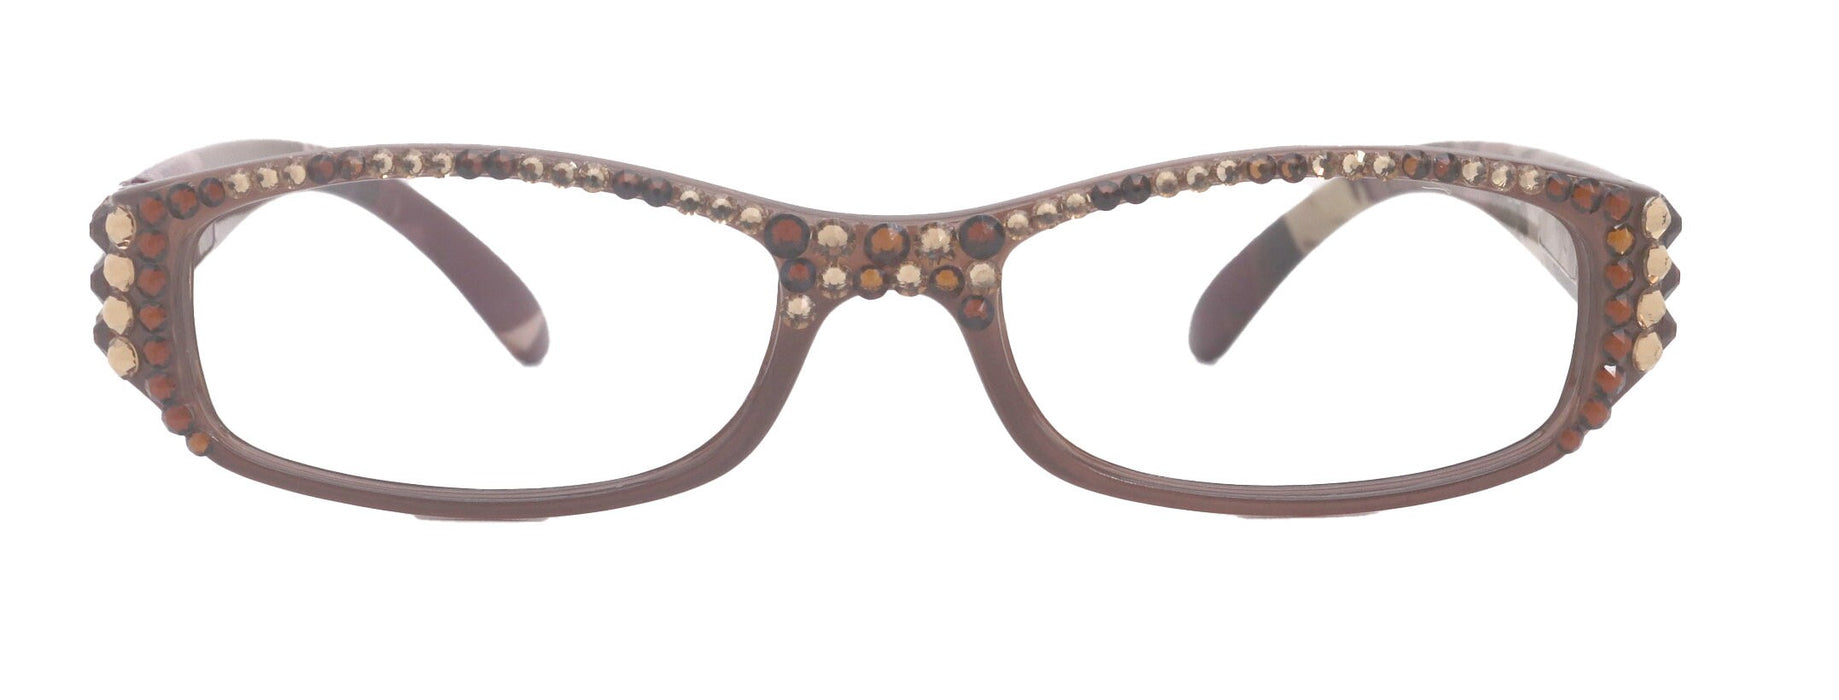 Rosie Bling Reading Glasses Women W (Ligth Colorado N Copper) Genuine European Crystals (Brown) NY Fifth Avenue